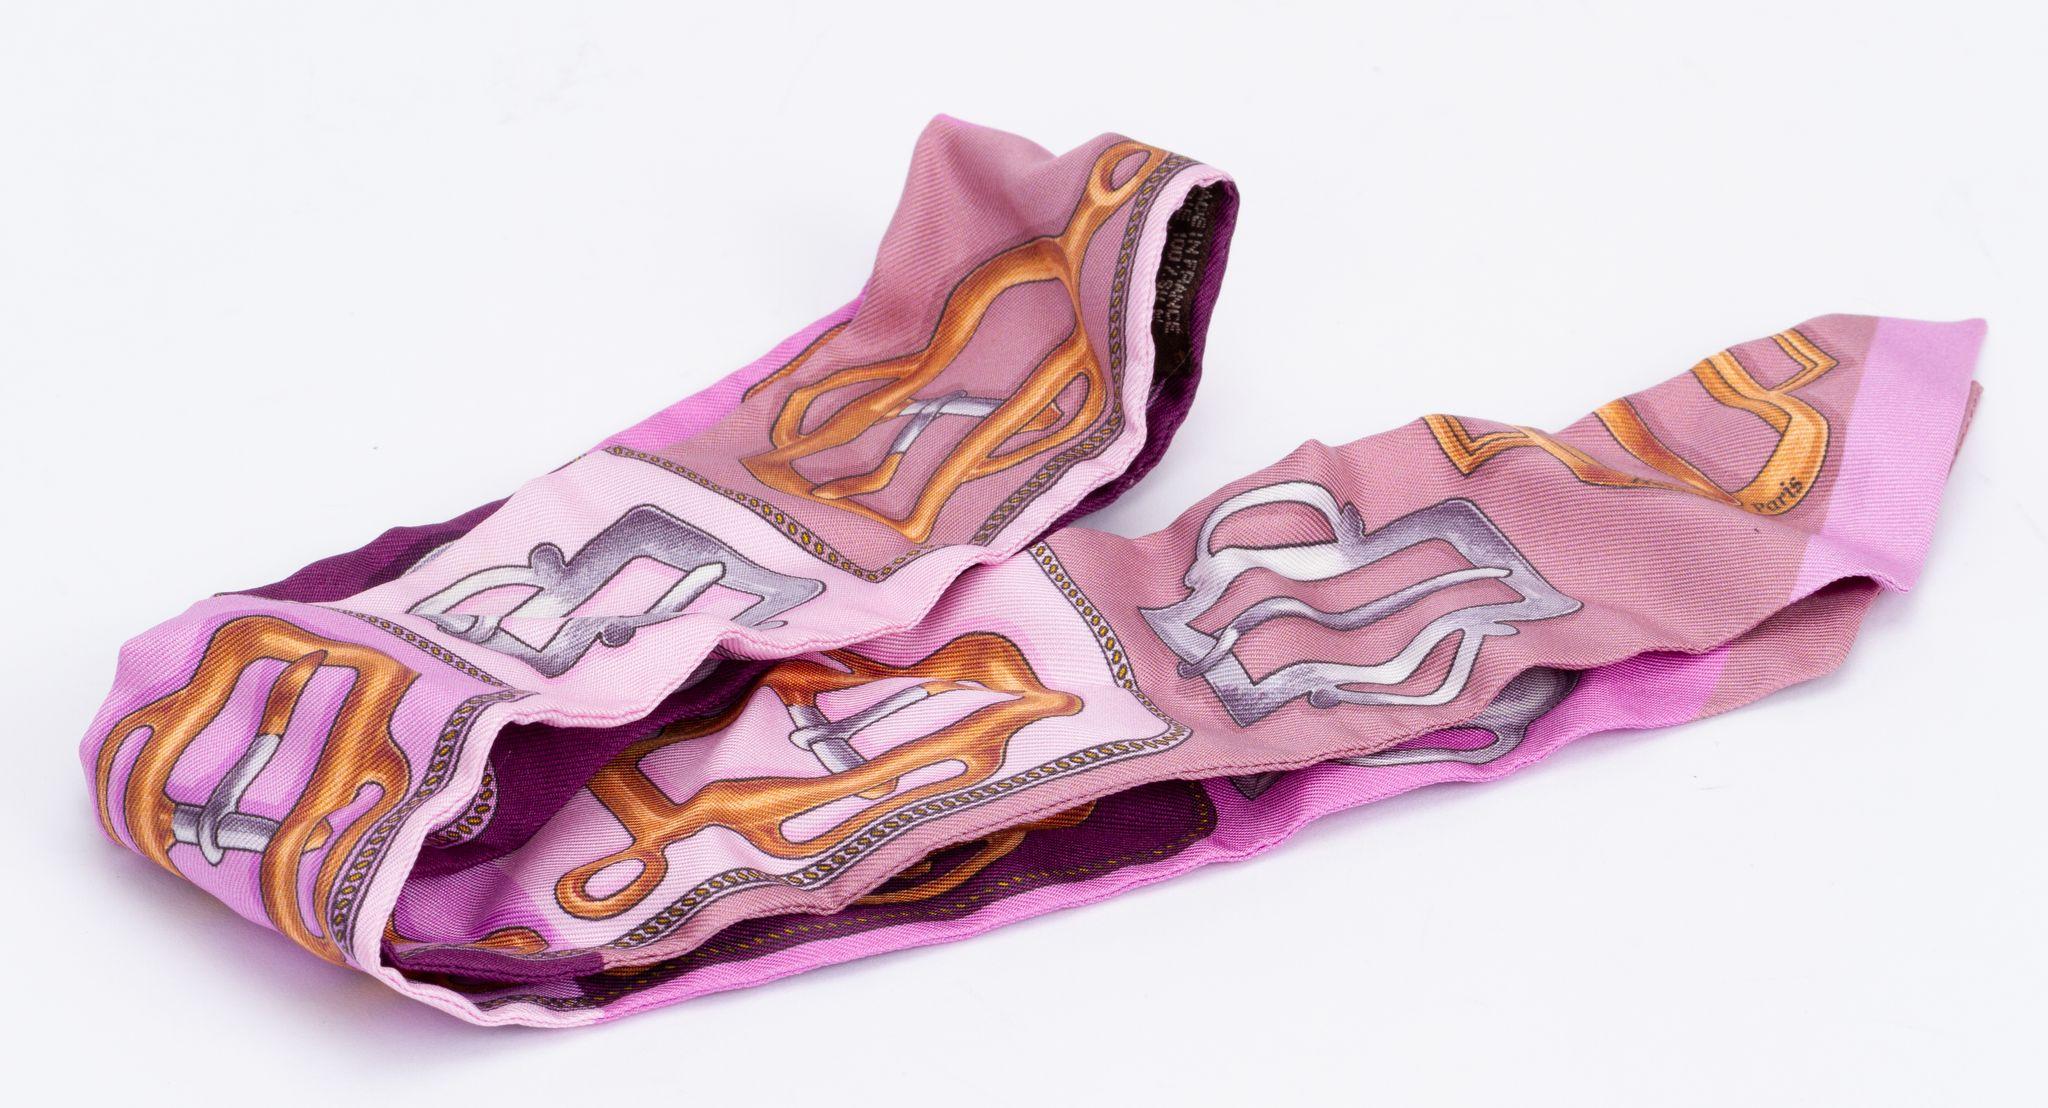 New Hermès Trophy Ribbon Twilly. The scarf is made out of silk and the main color is pink. The print shows saddle stirrups. The pieces comes with a scarf ring. It is packed in the original box and ribbon.